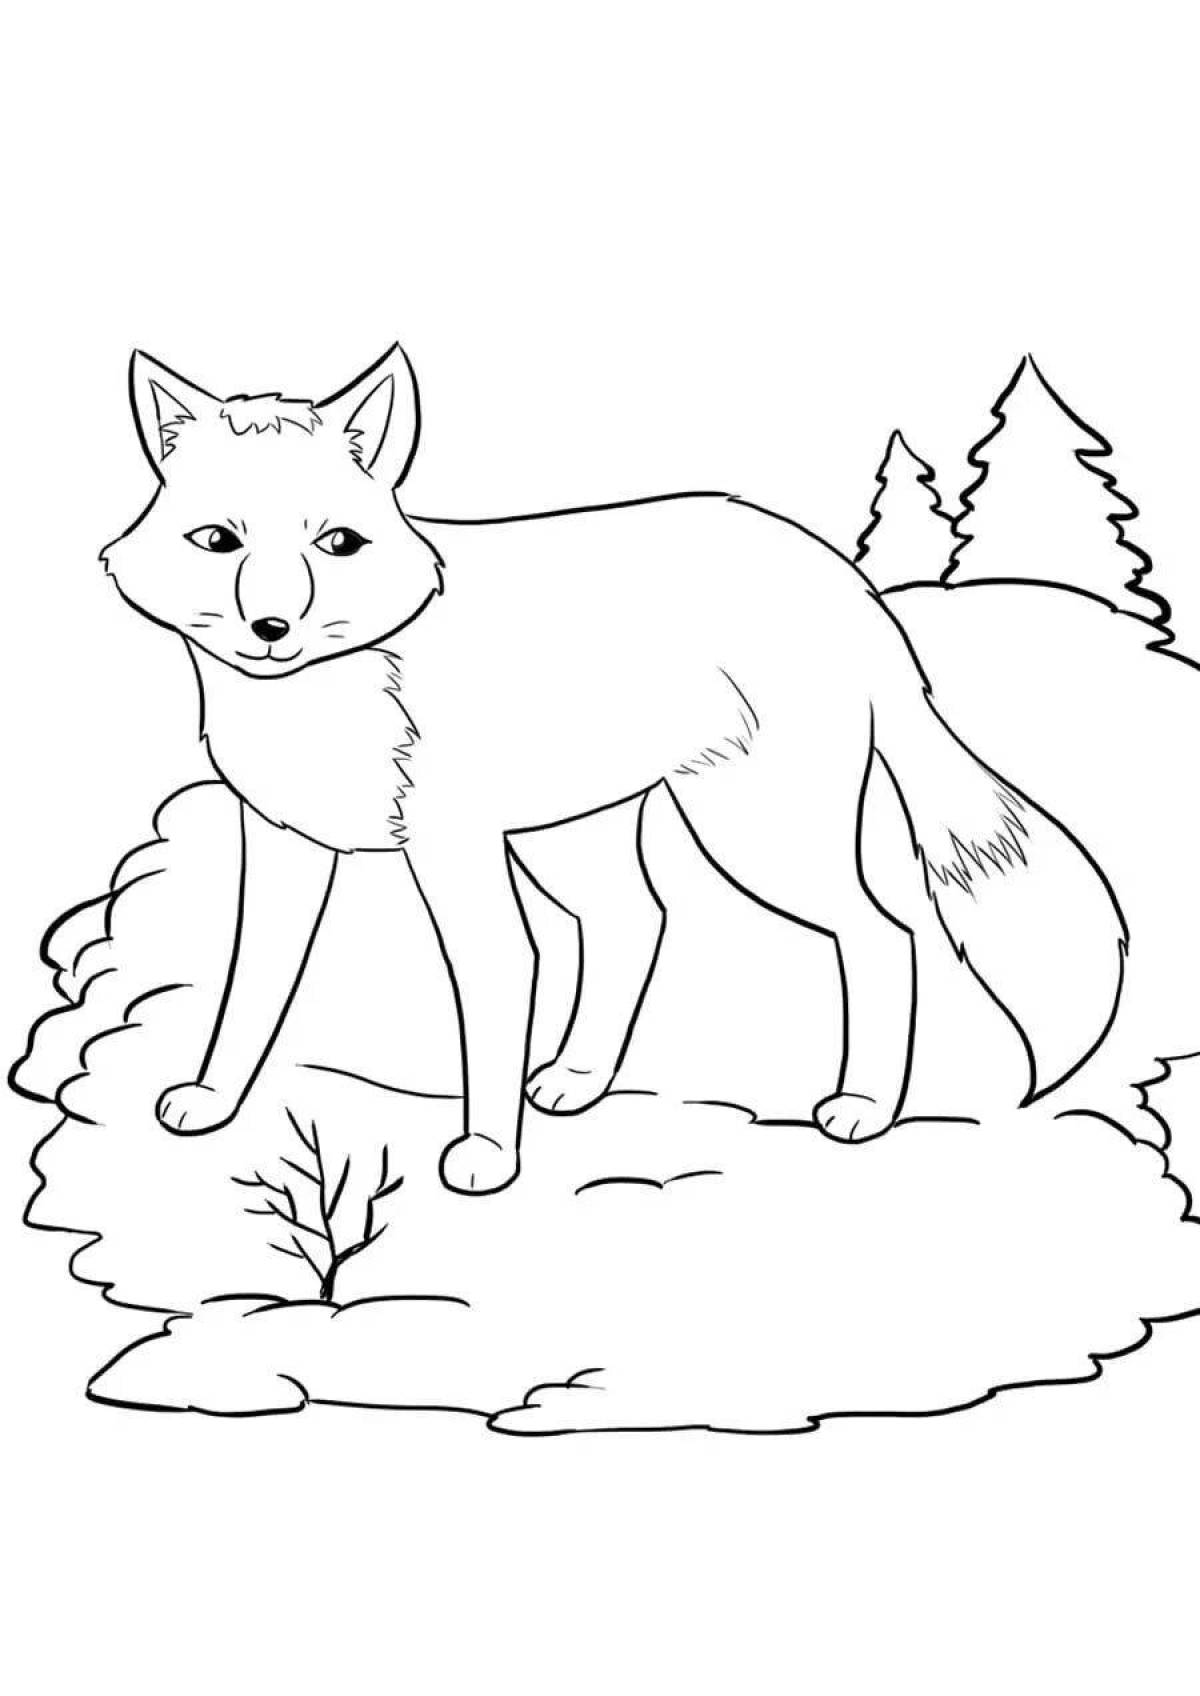 Coloring page serendipitous animals in winter